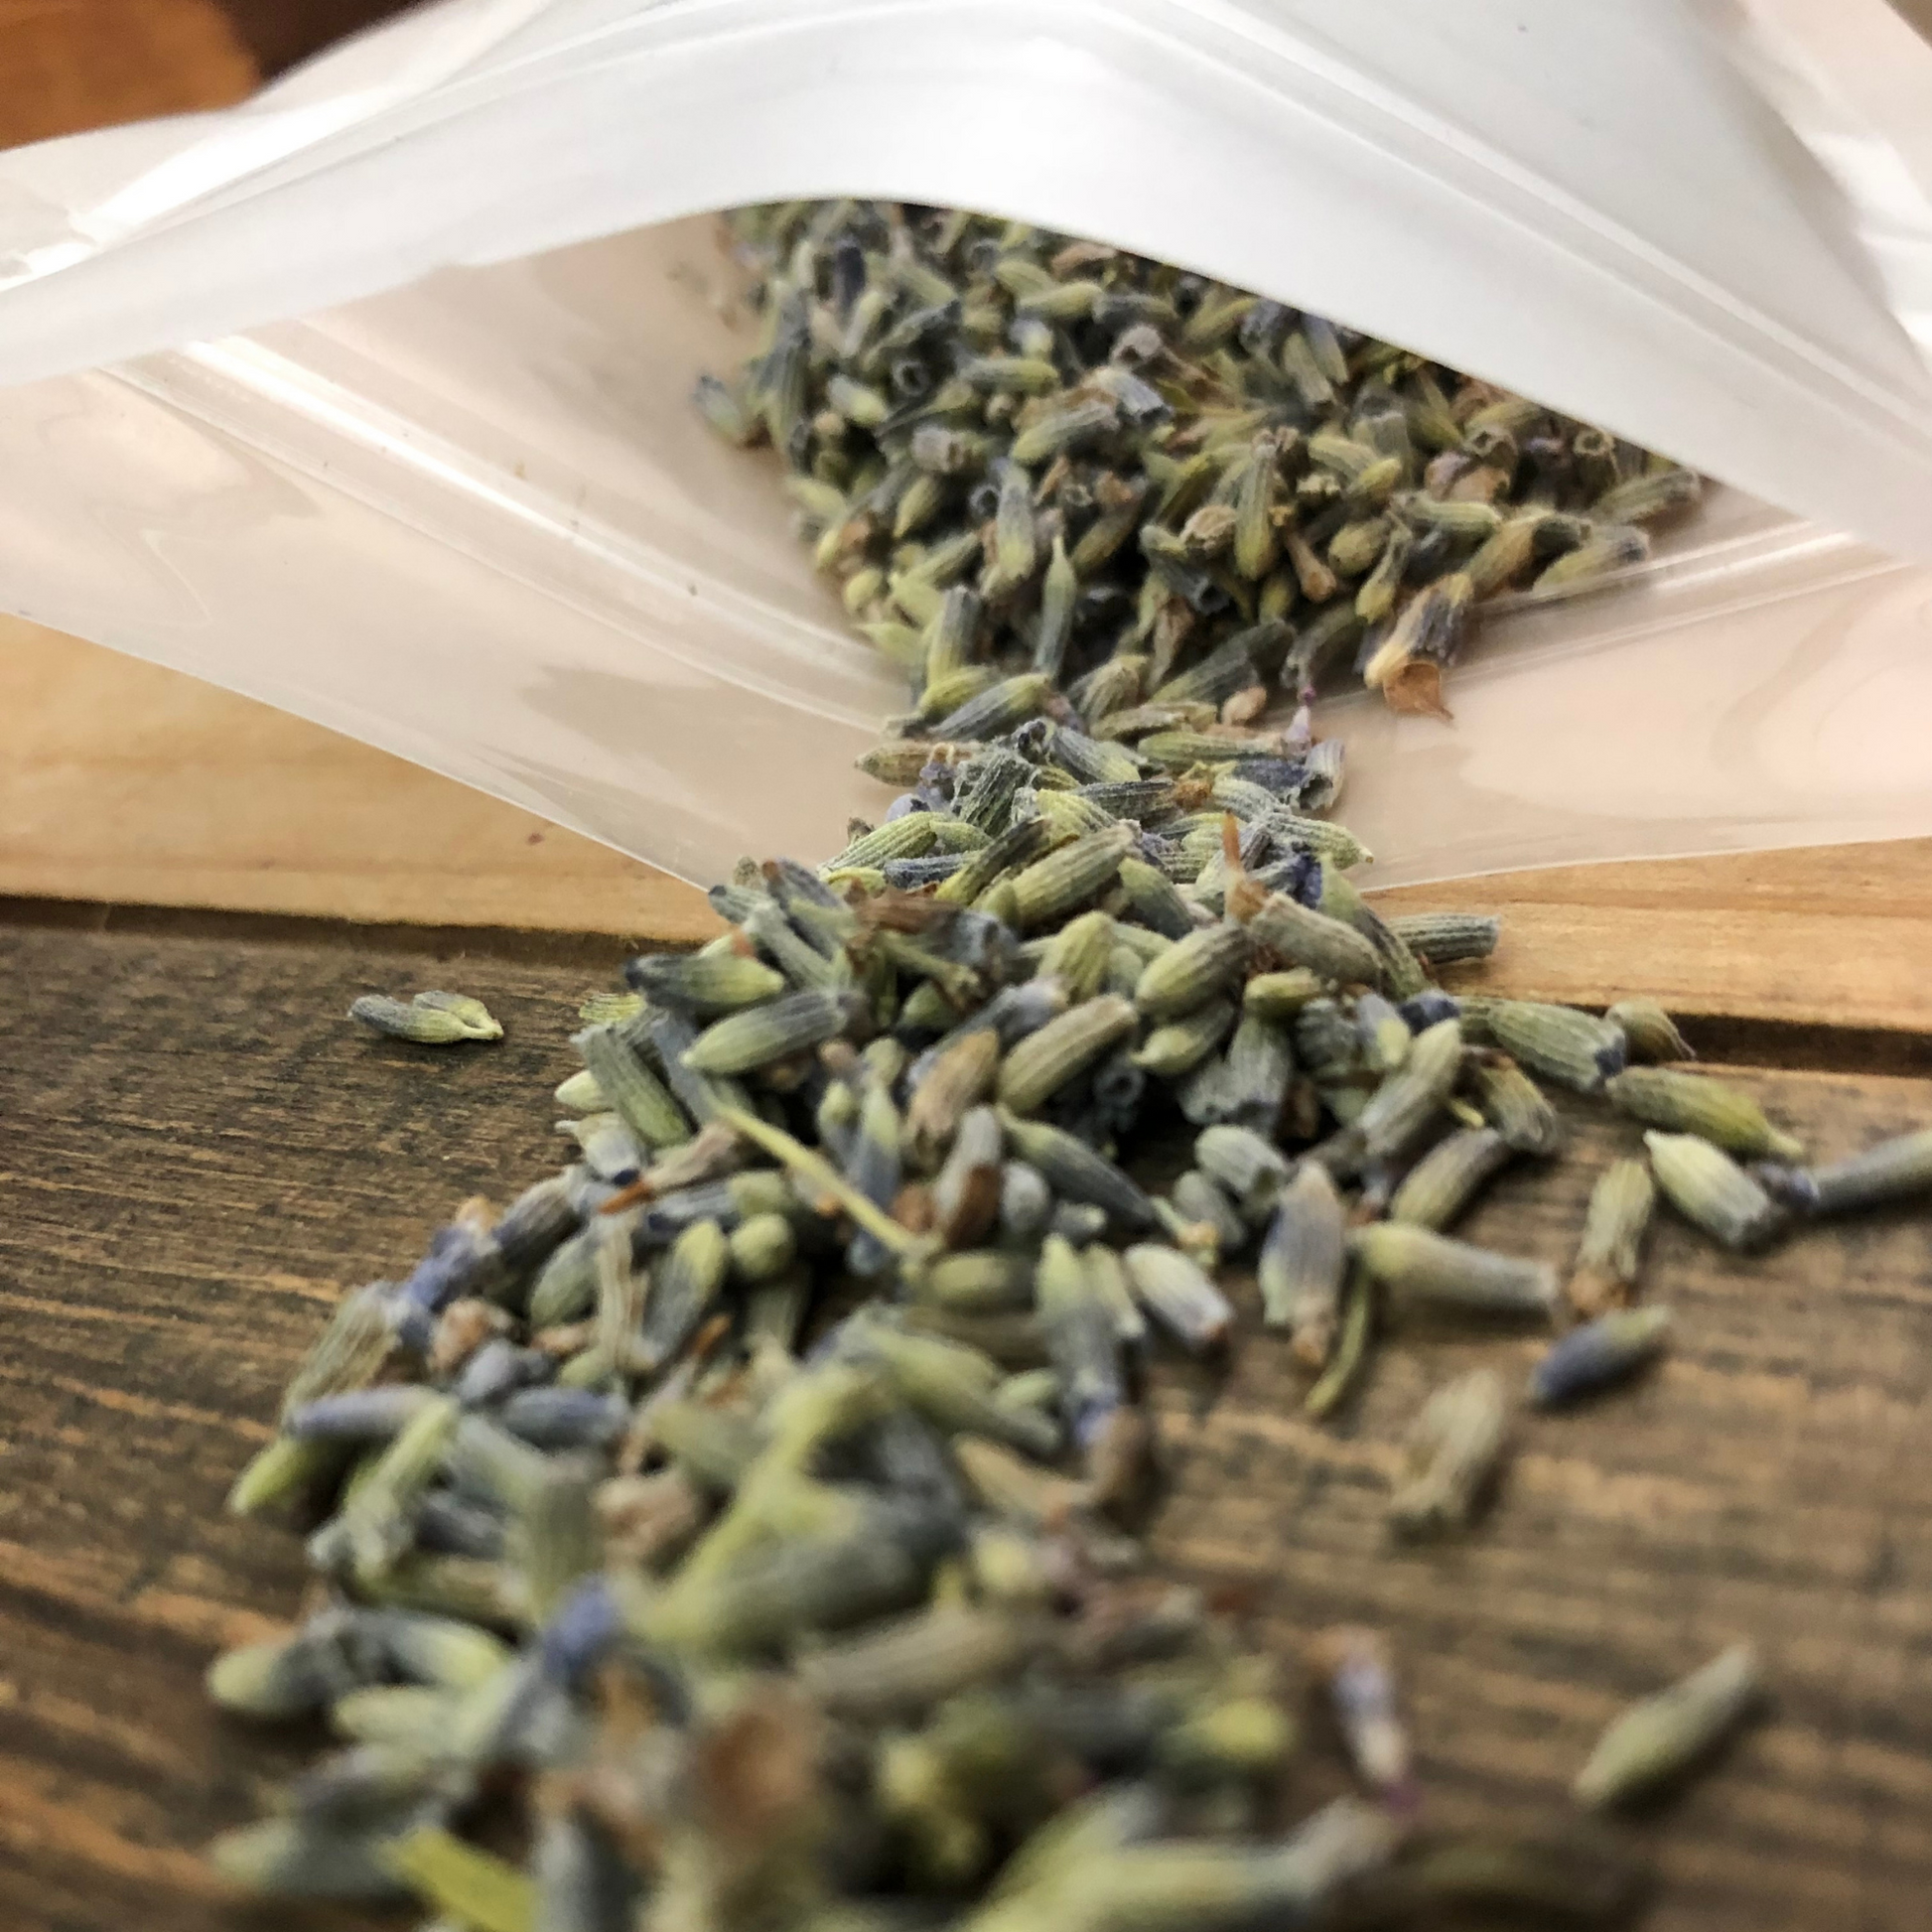 upclose image of dried lavender spilling out of a clear bag on a wooden table top